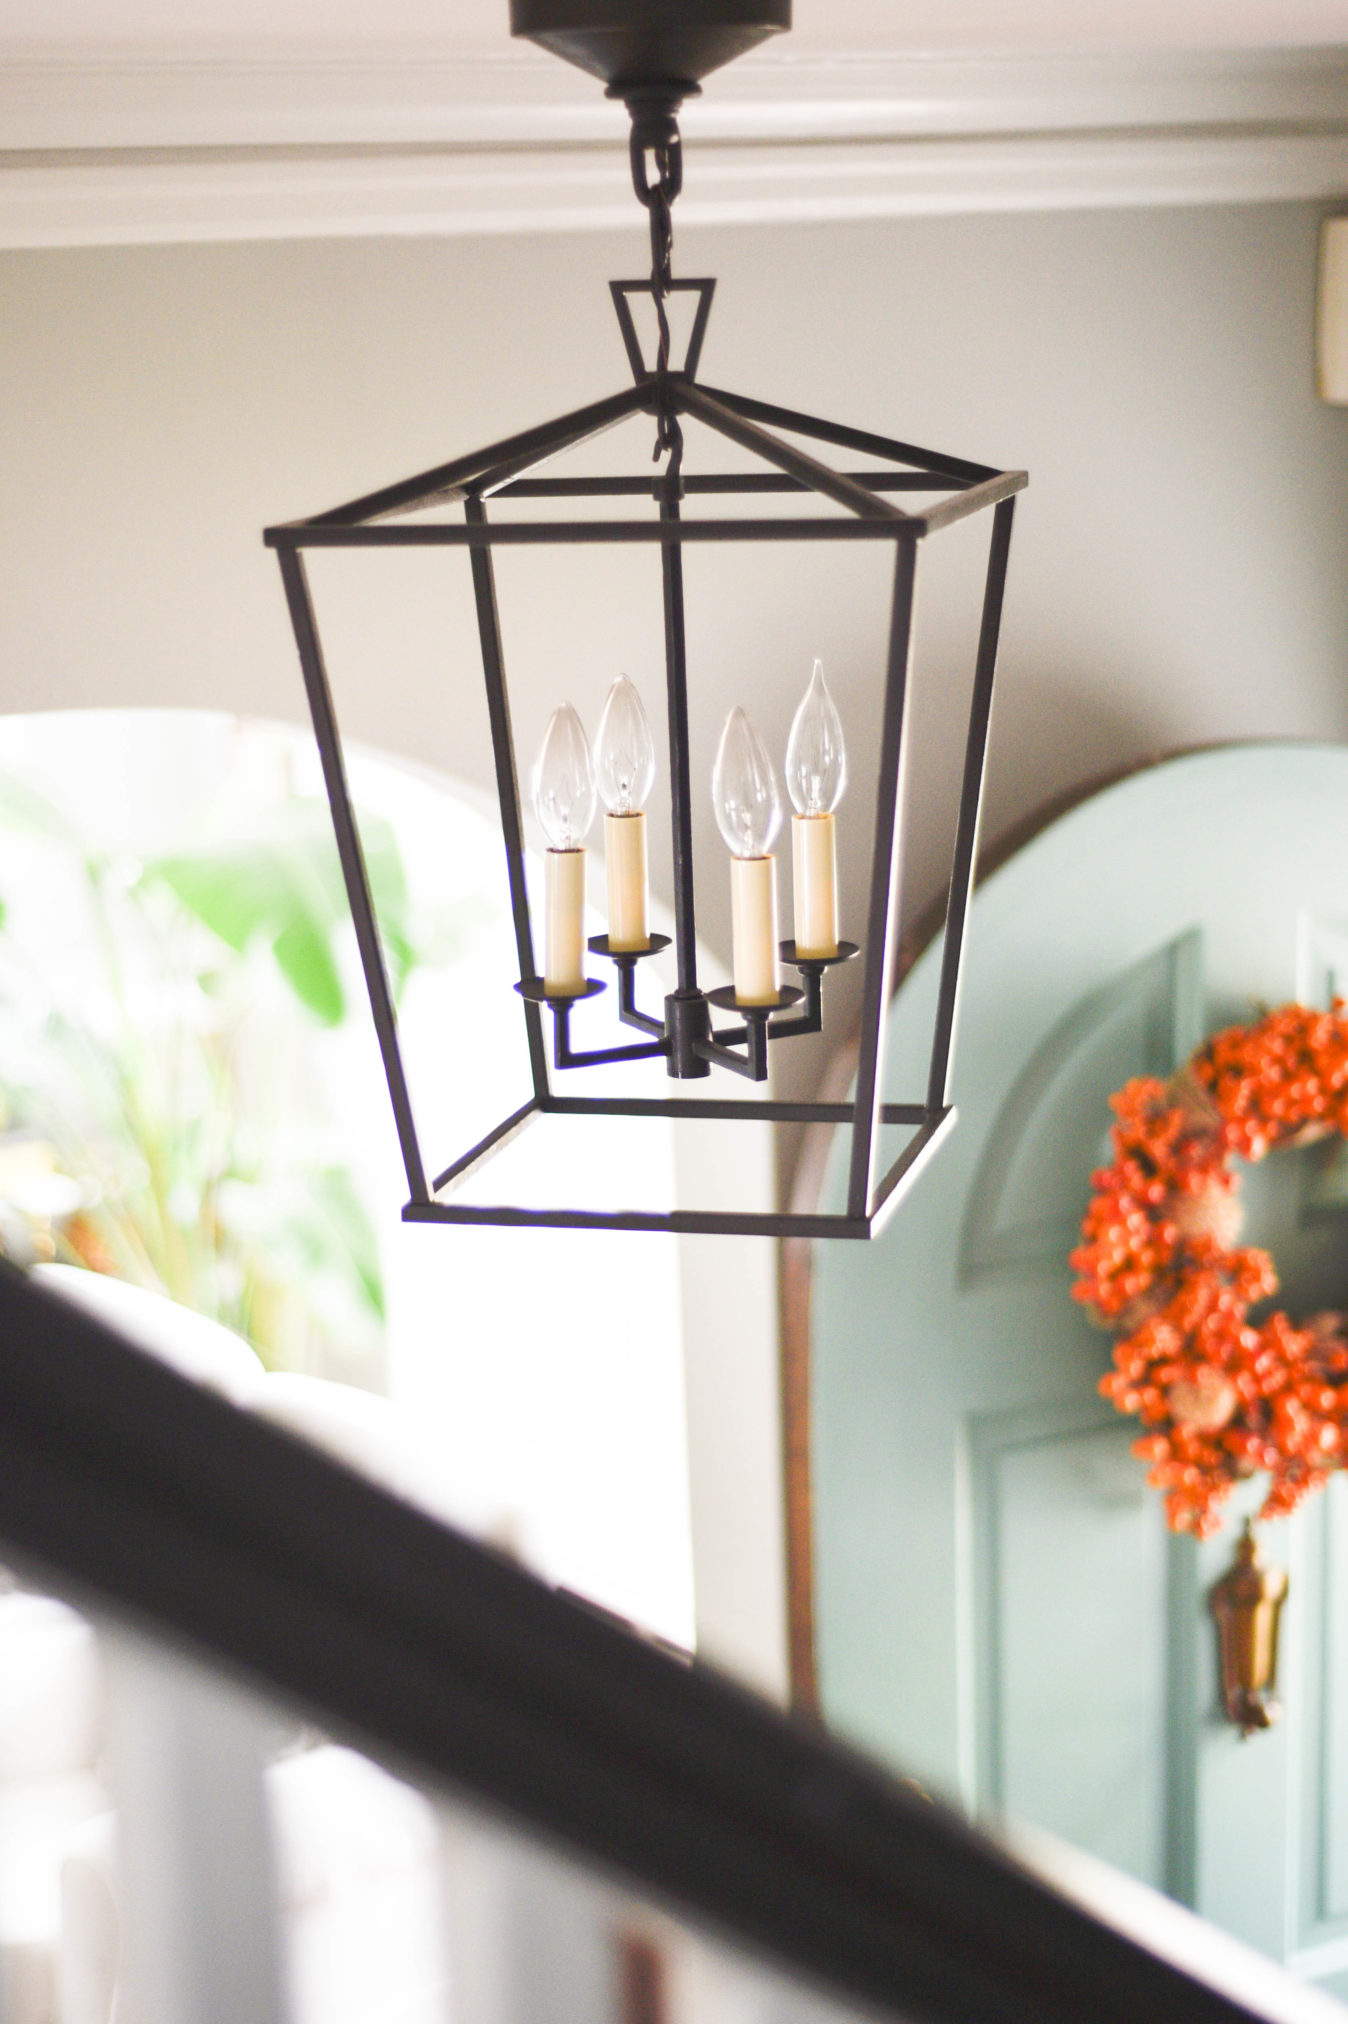 Home Blogger Home Tour entryway styling with lantern light fixture www.homewithkeki.com